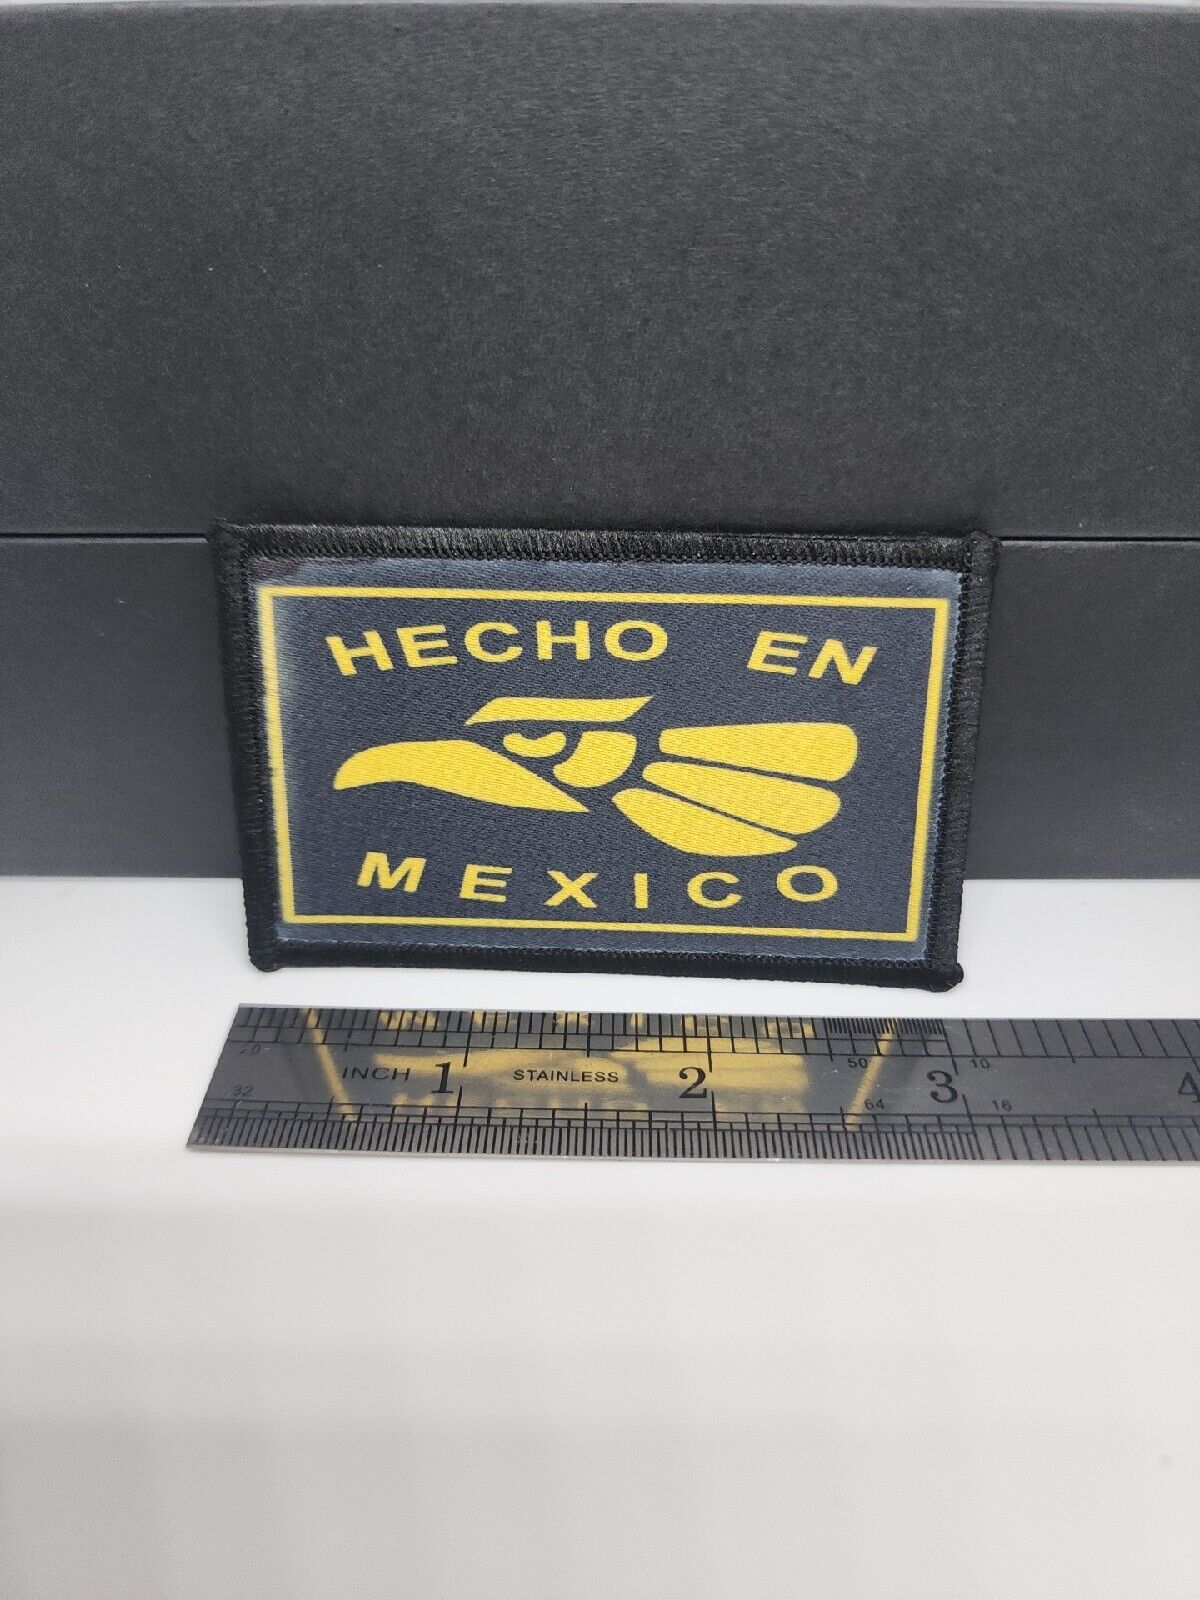 HECHO EN MEXICO Morale Patch Custom Tactical patch 2x3 inch